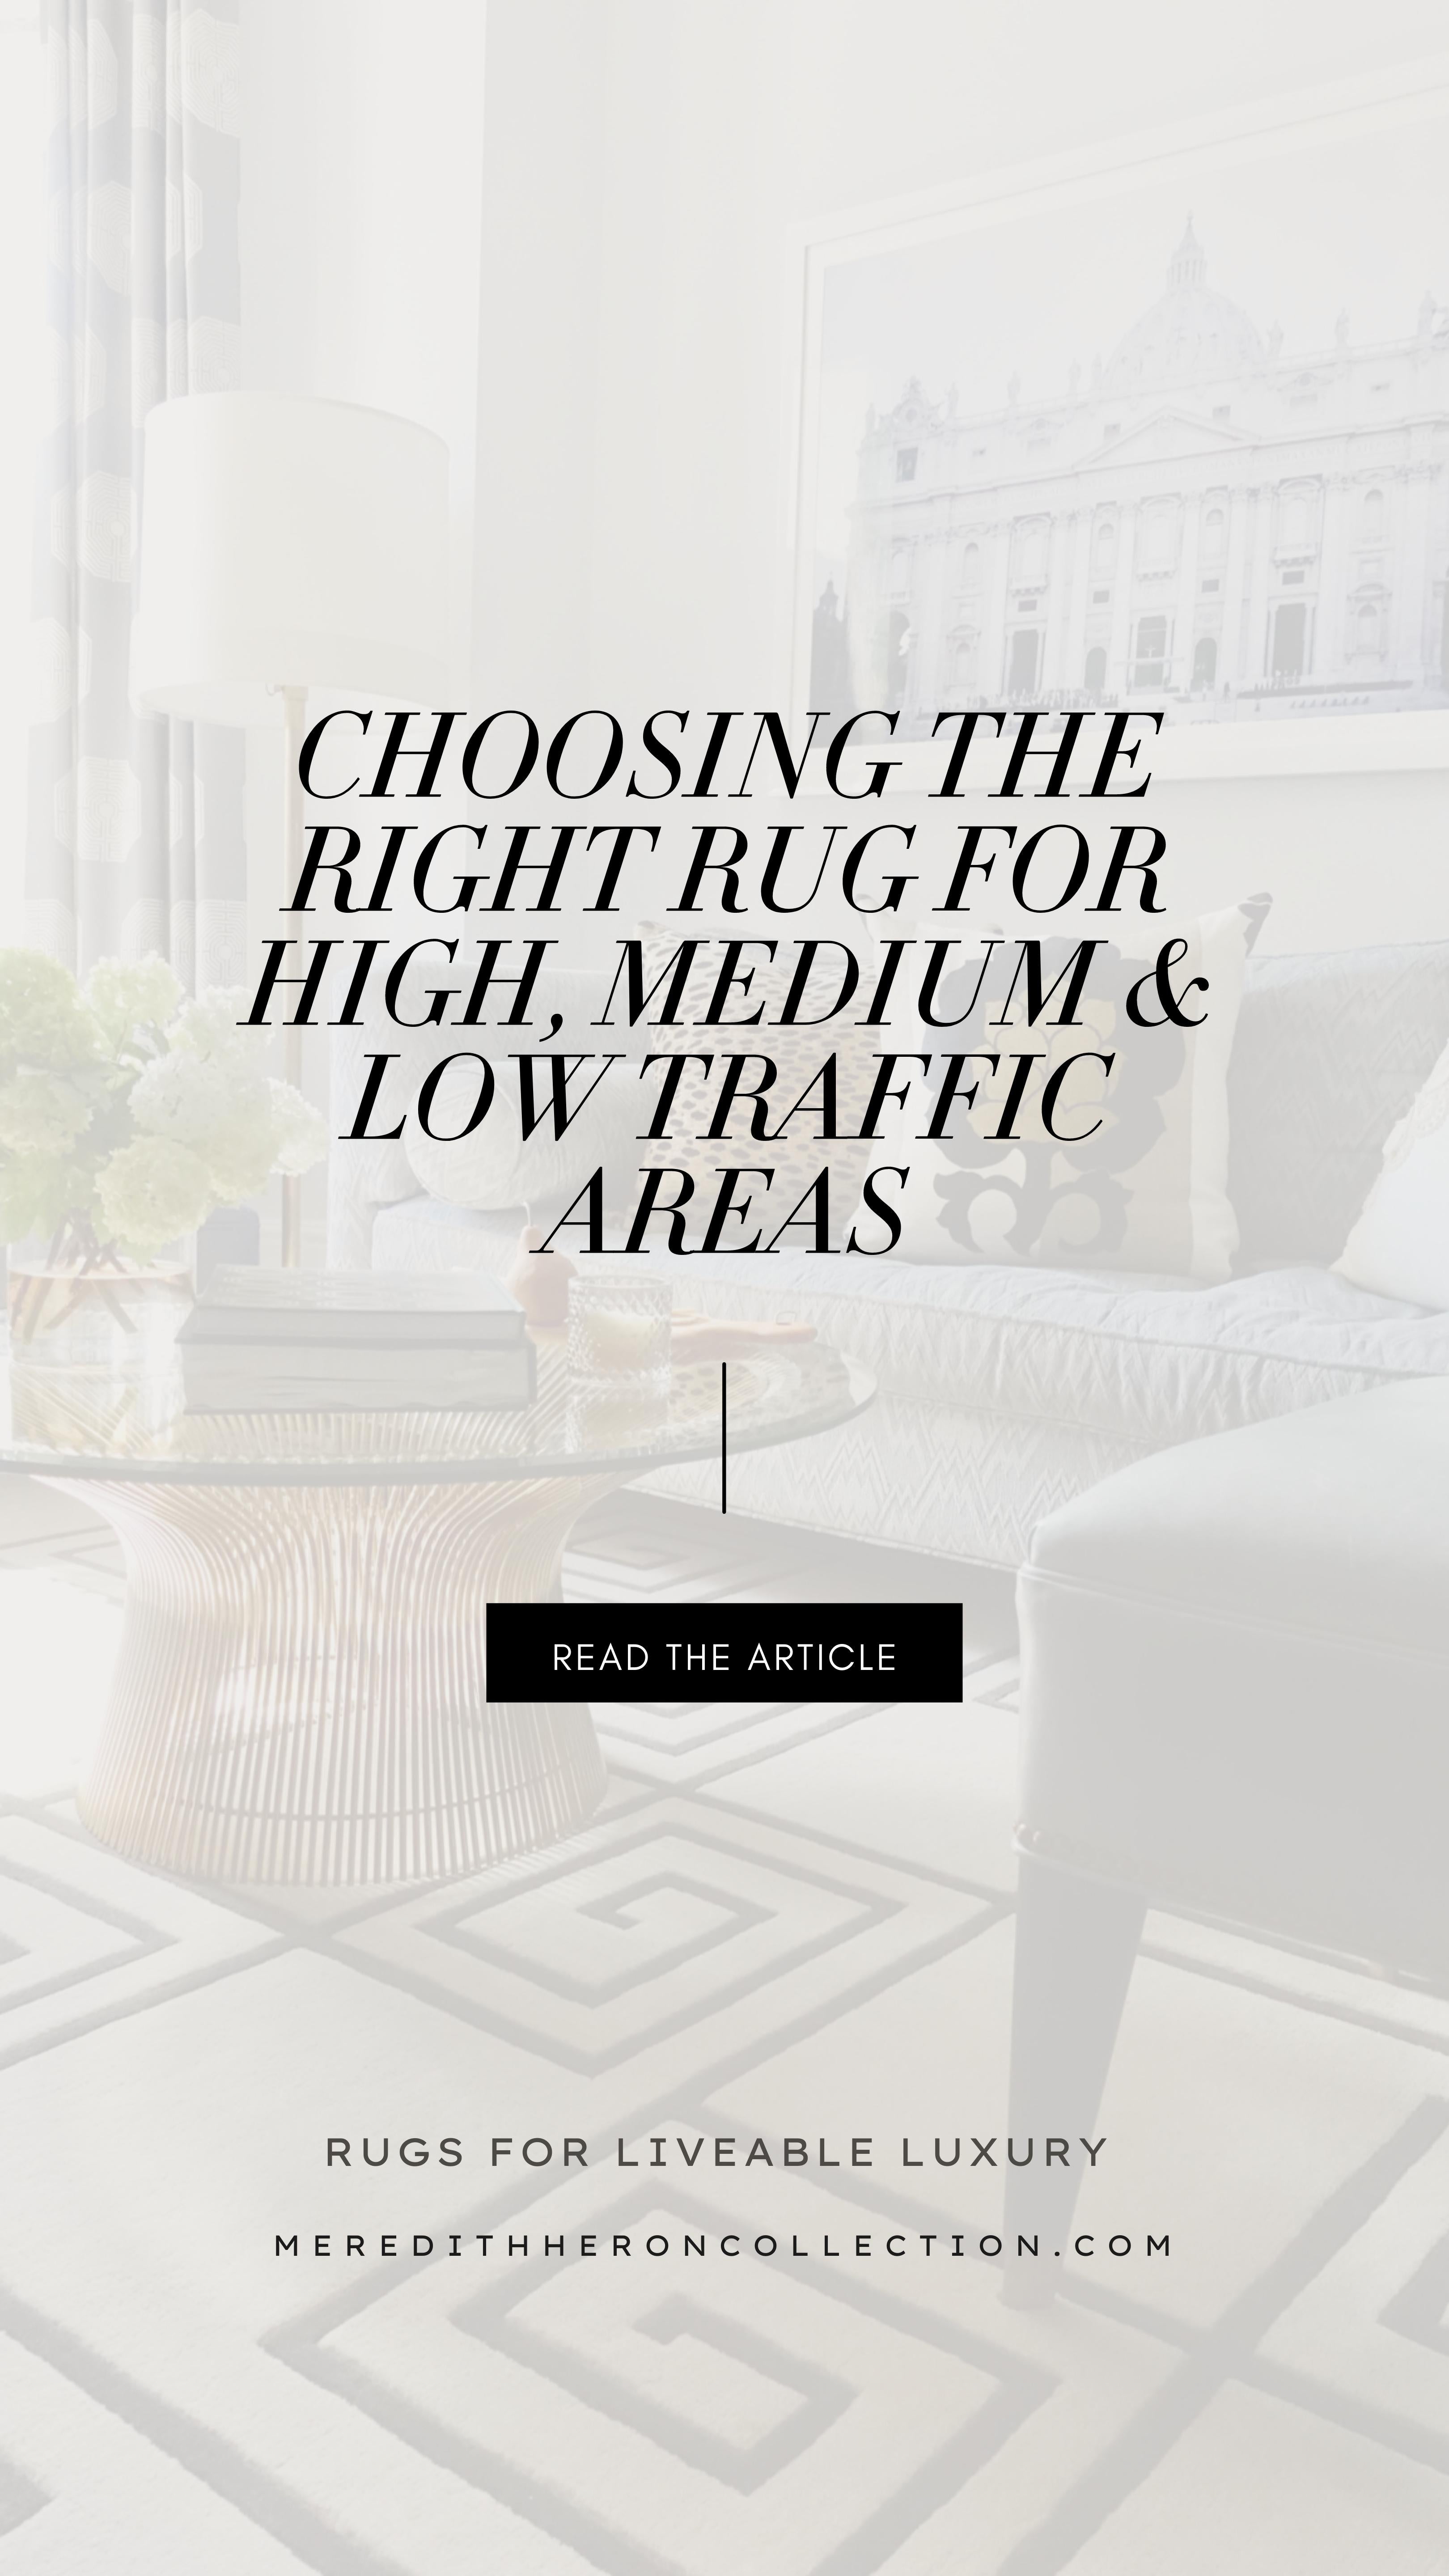 Choosing the Right Rug for High, Medium & Low Traffic Areas